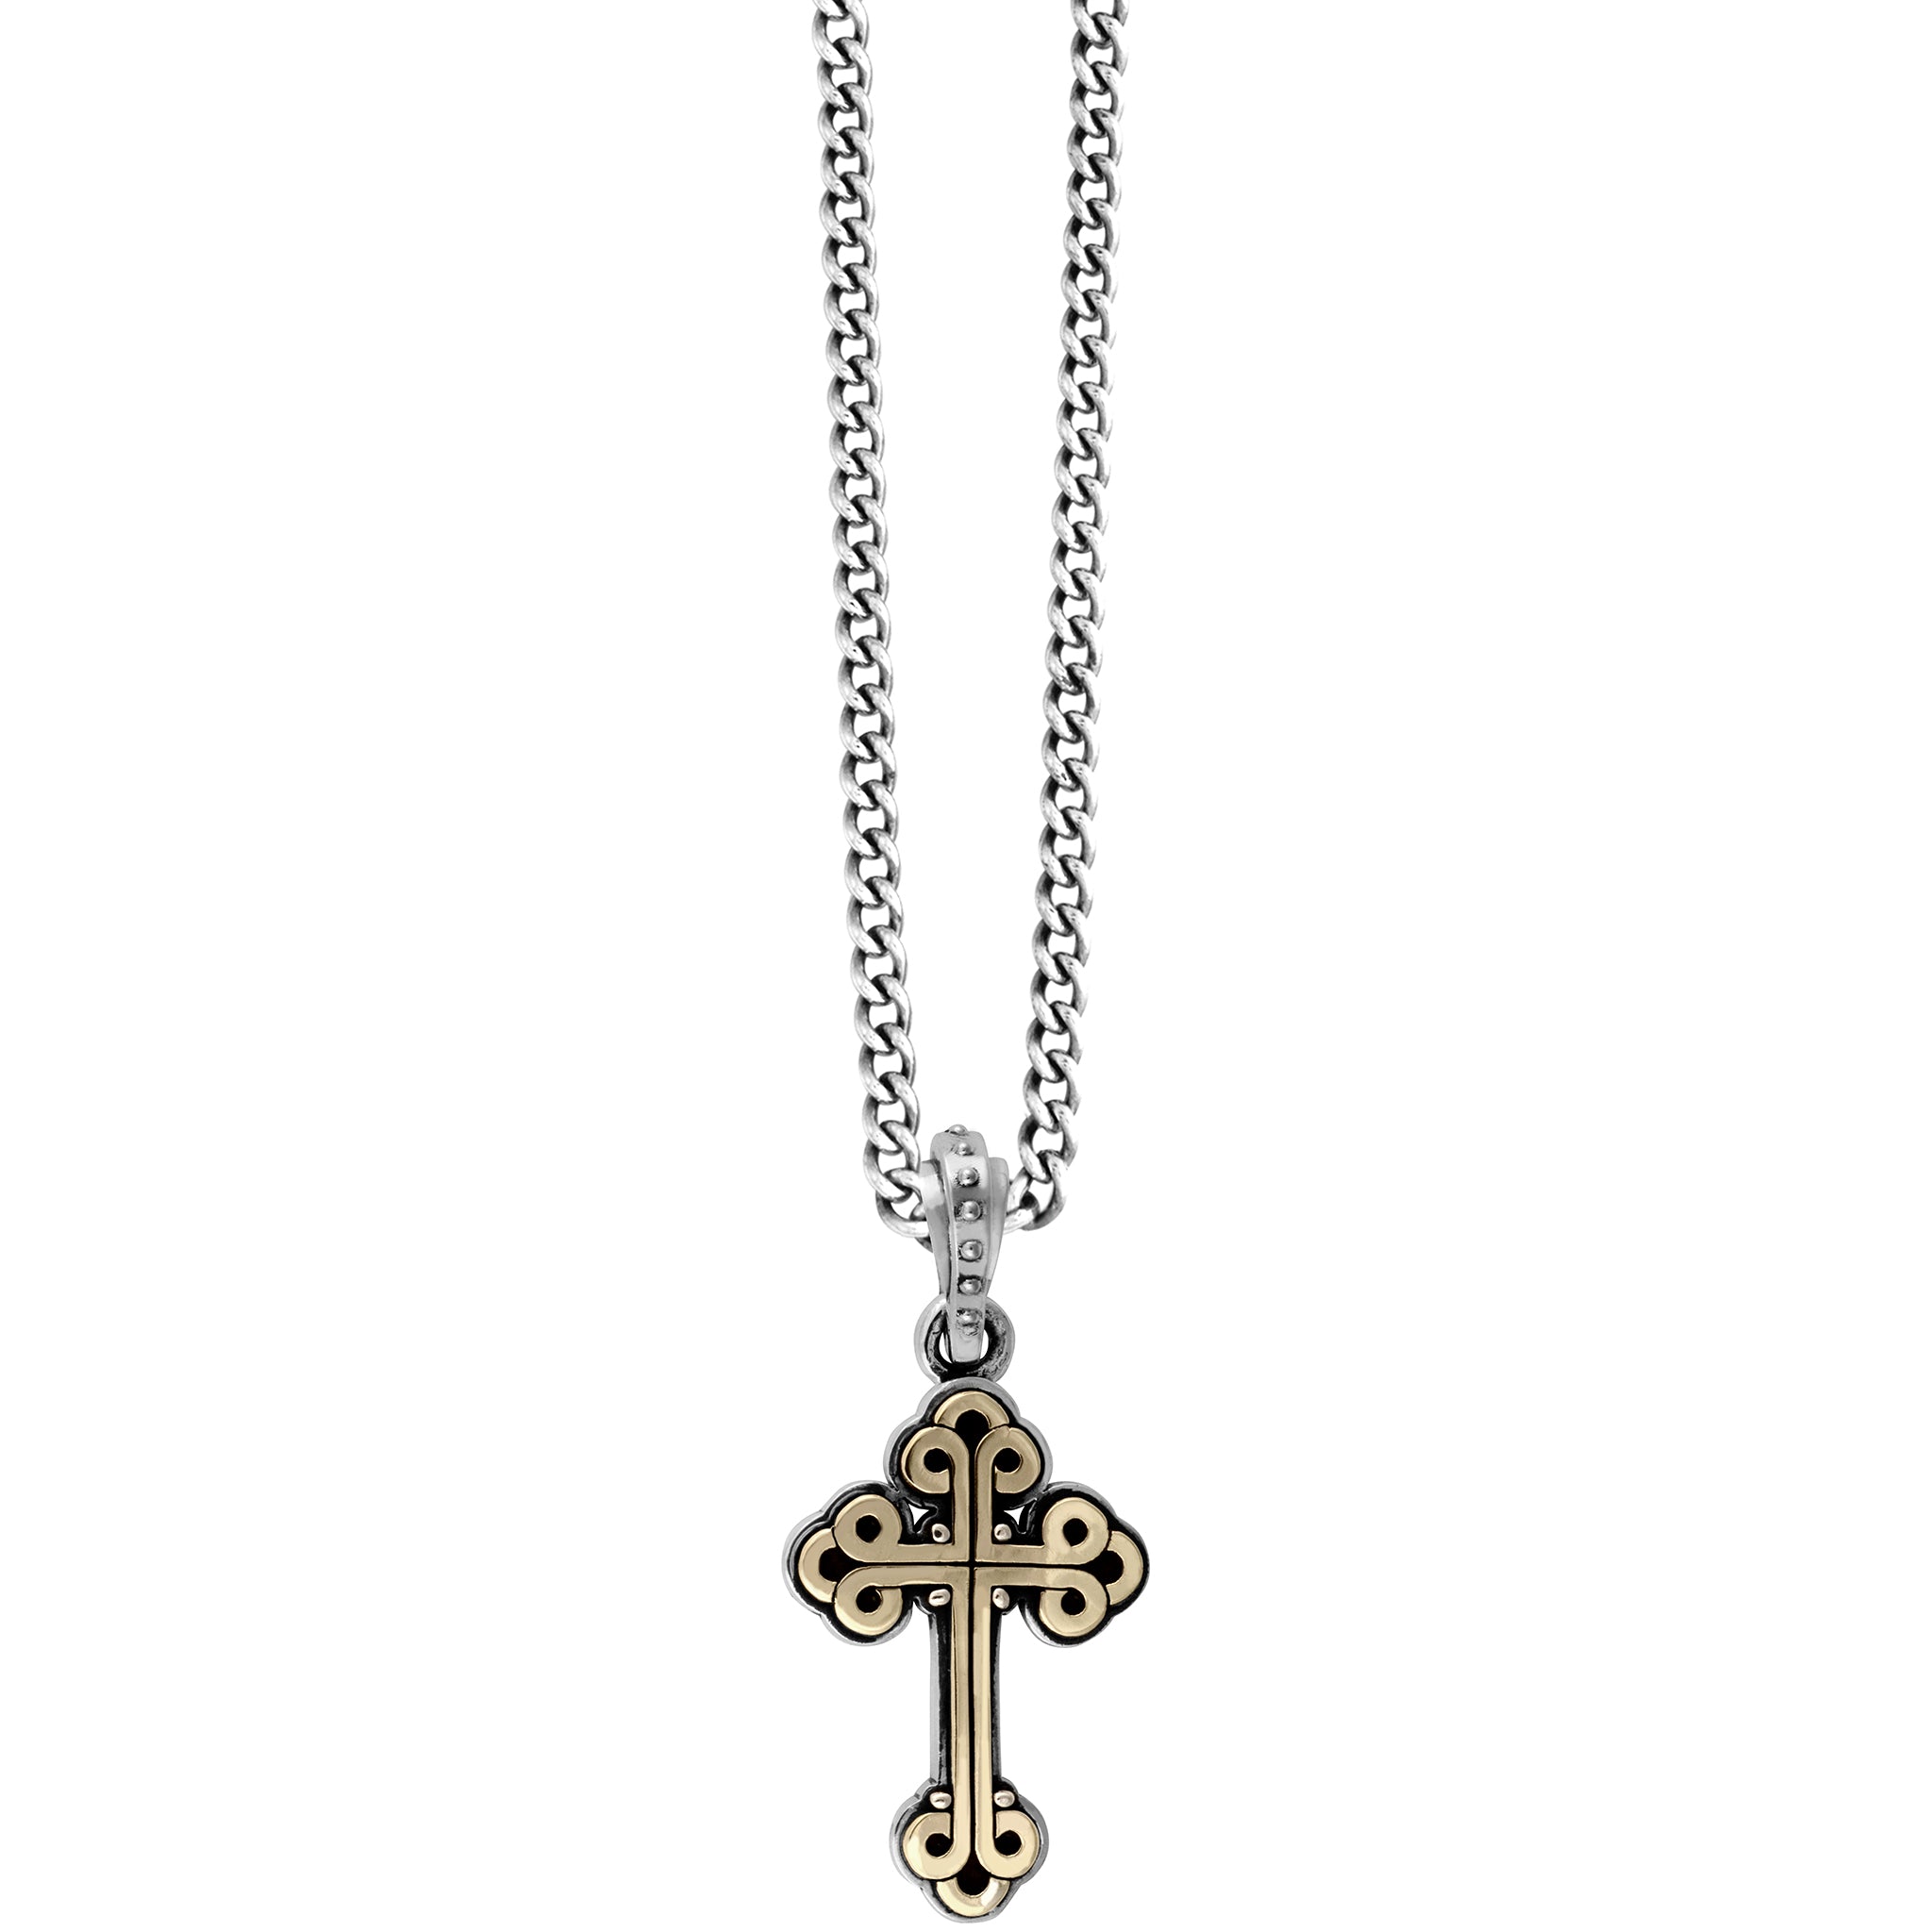 Small Alloy Traditional Cross in Silver Frame Pendant